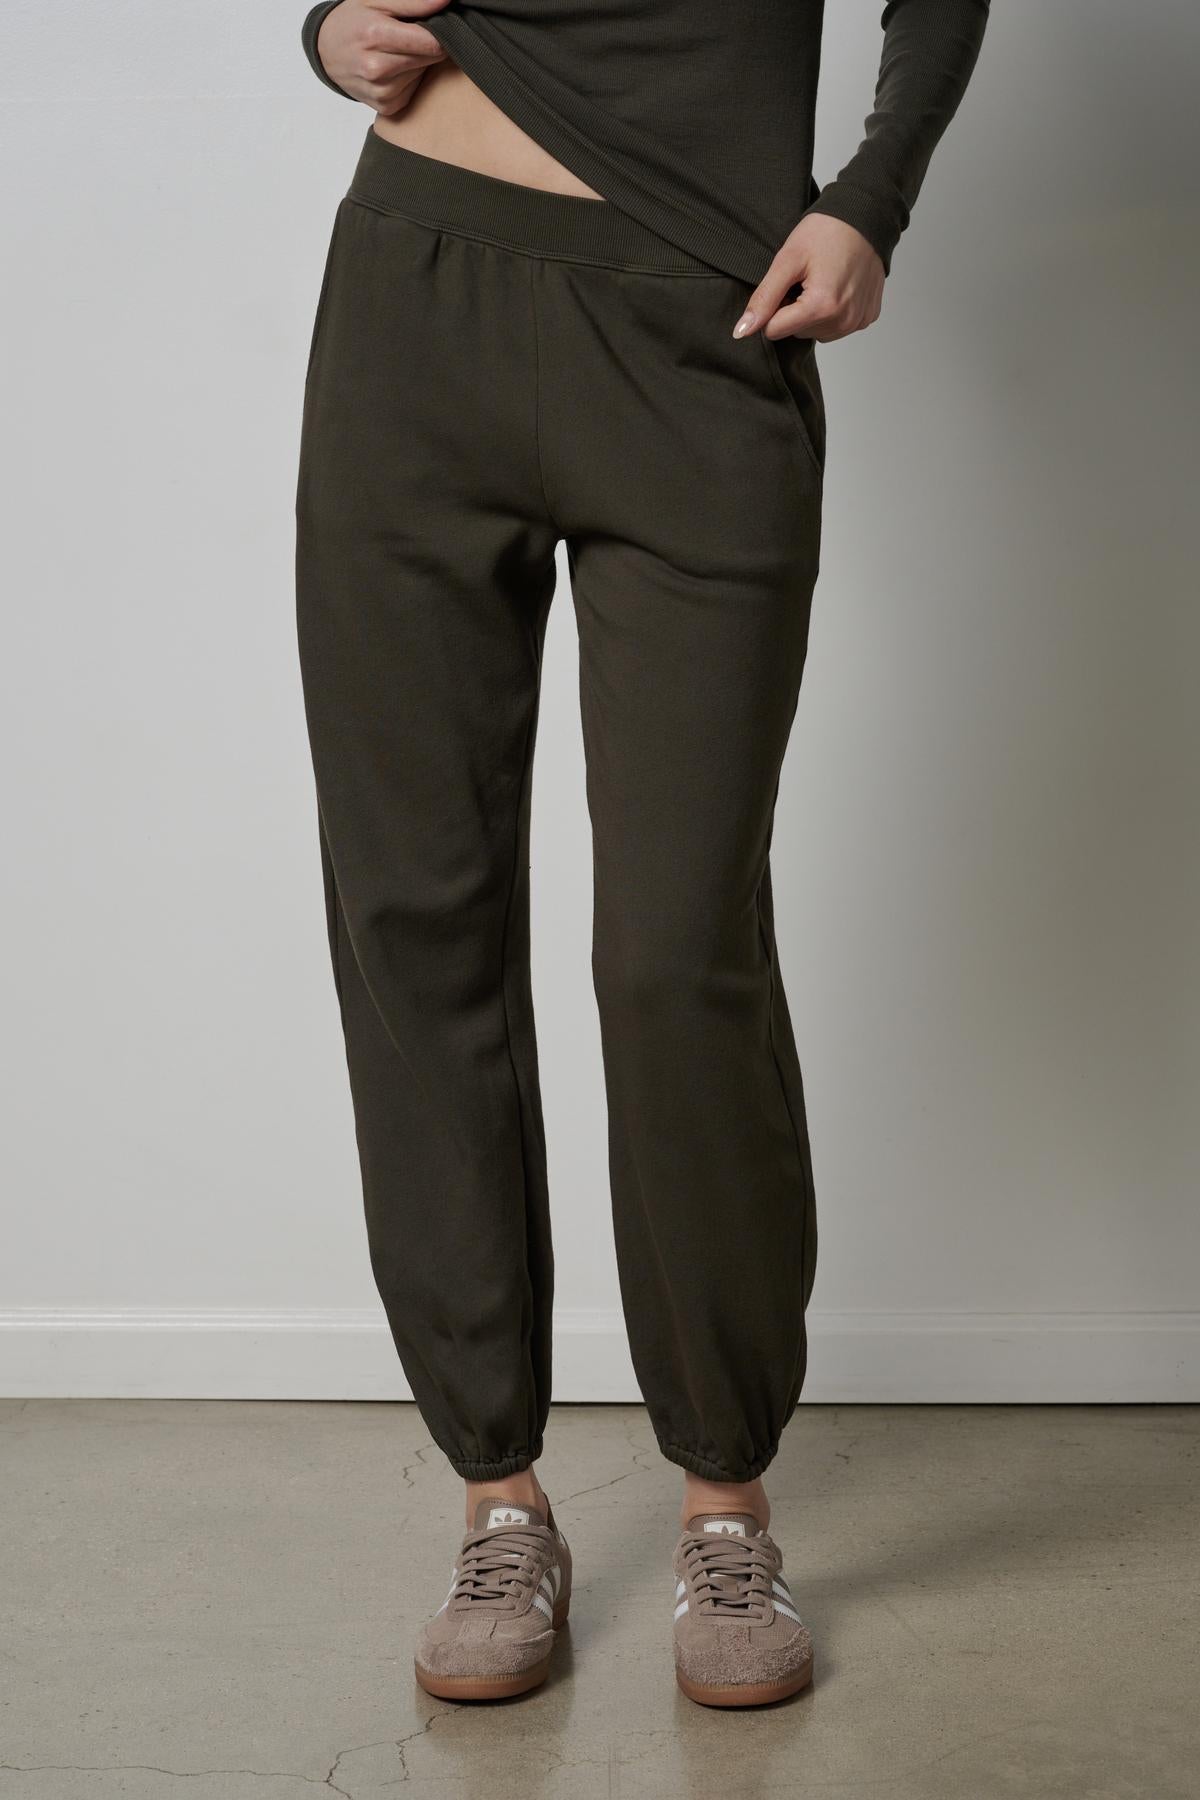 A woman wearing the Velvet by Jenny Graham ZUMA SWEATPANT in olive green.-26827763450049